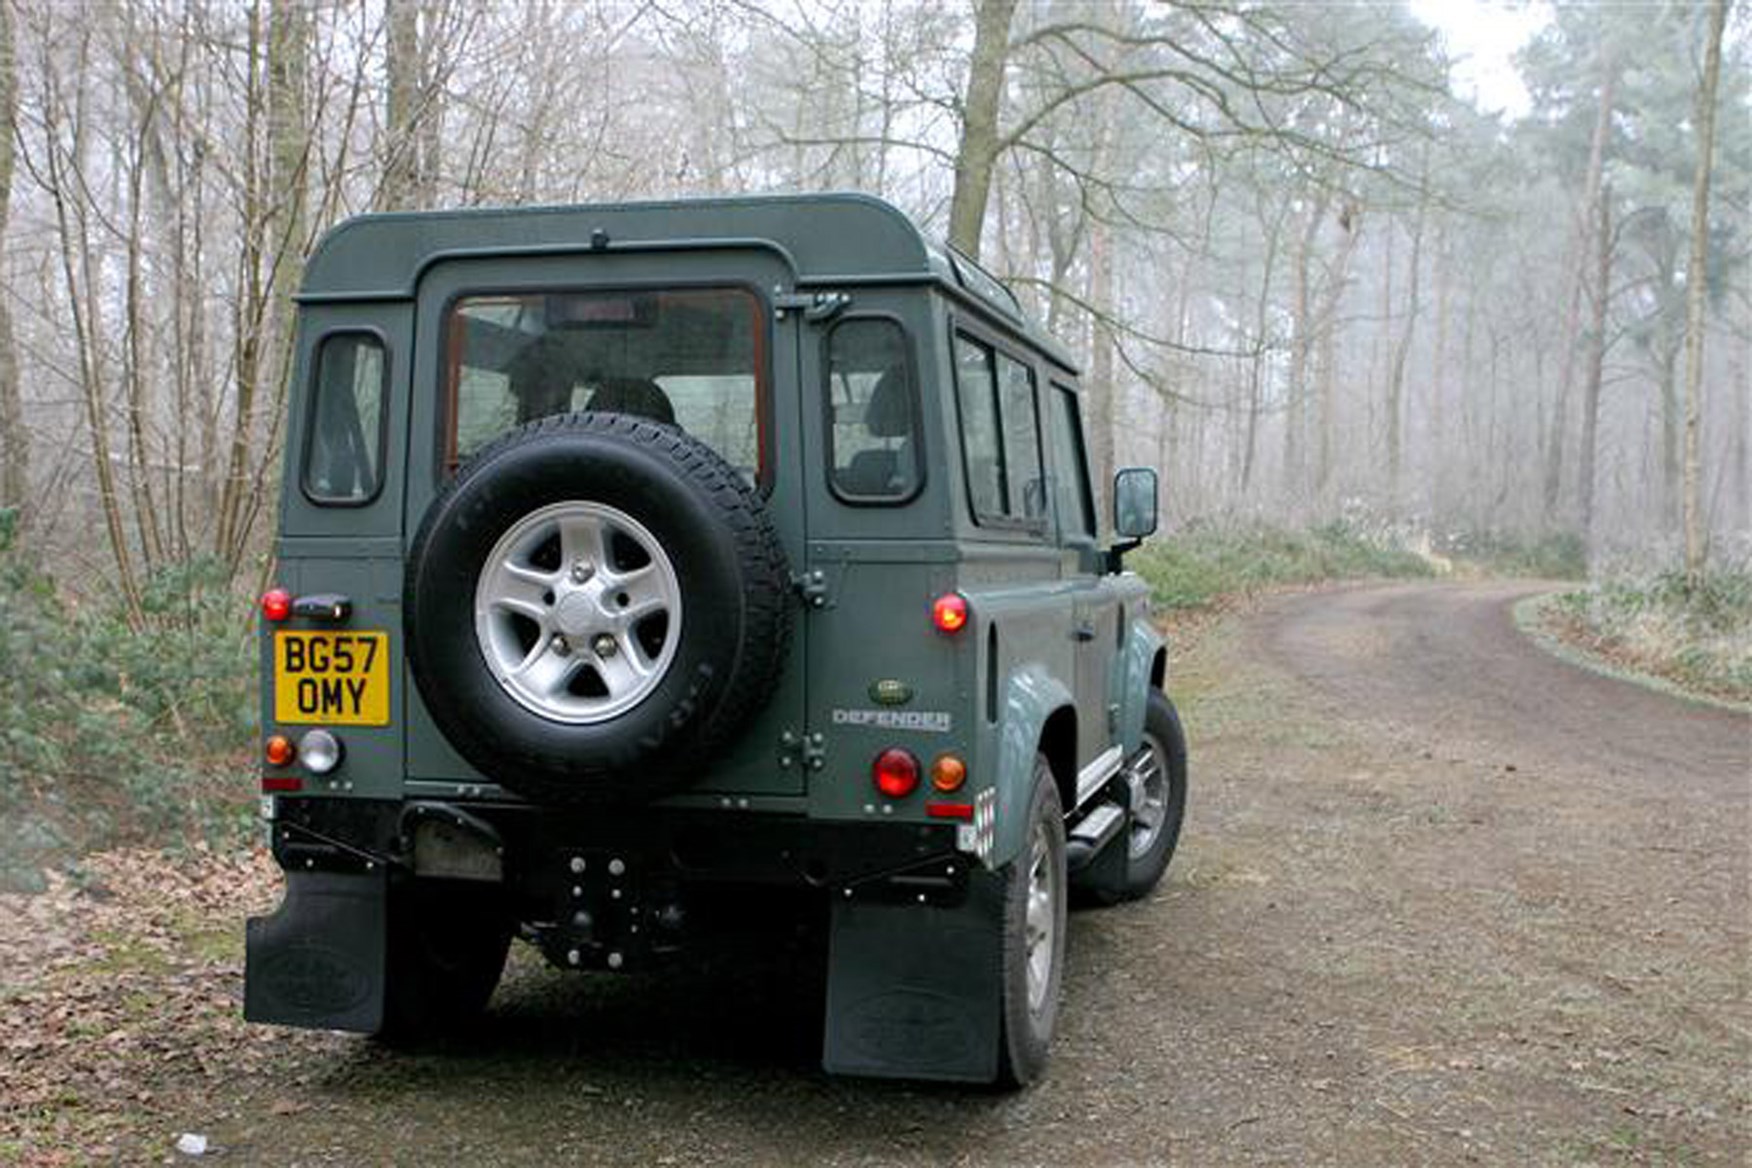 Land Rover Defender 2007-2016 review on Parkers Vans - rear exterior